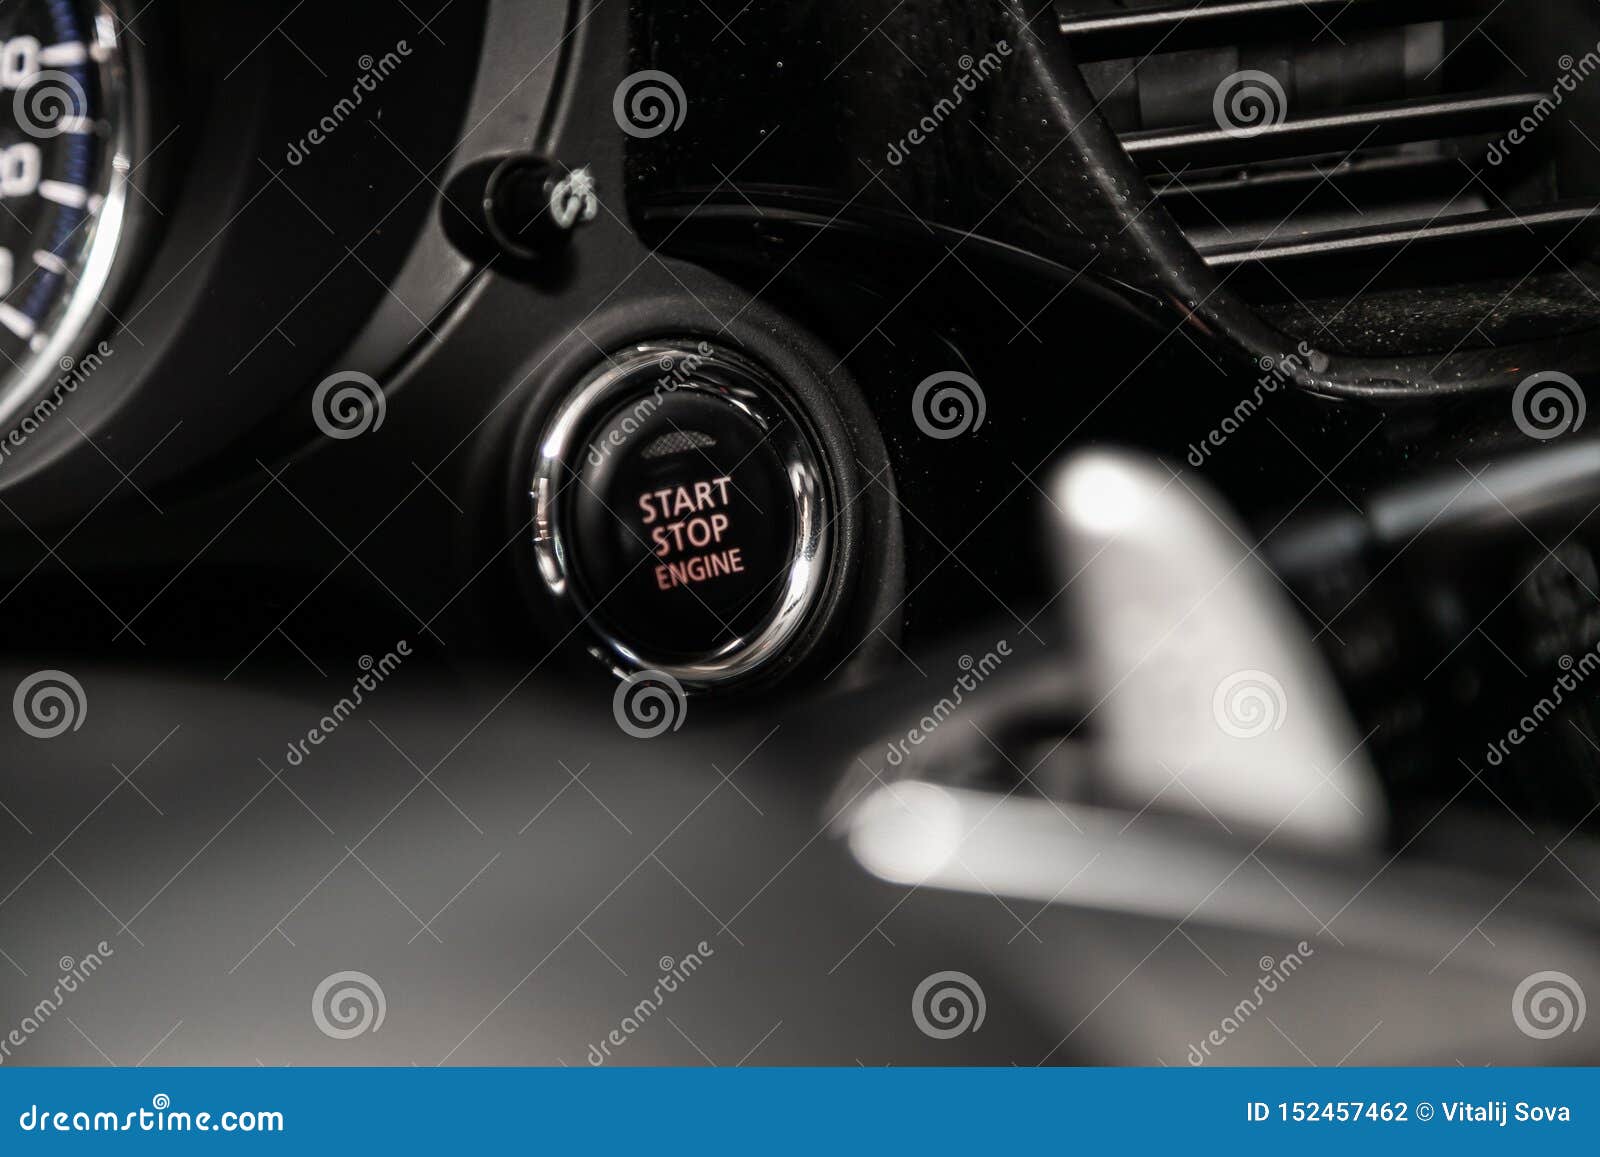 Car Interior And Detailing Stock Photo Image Of Power